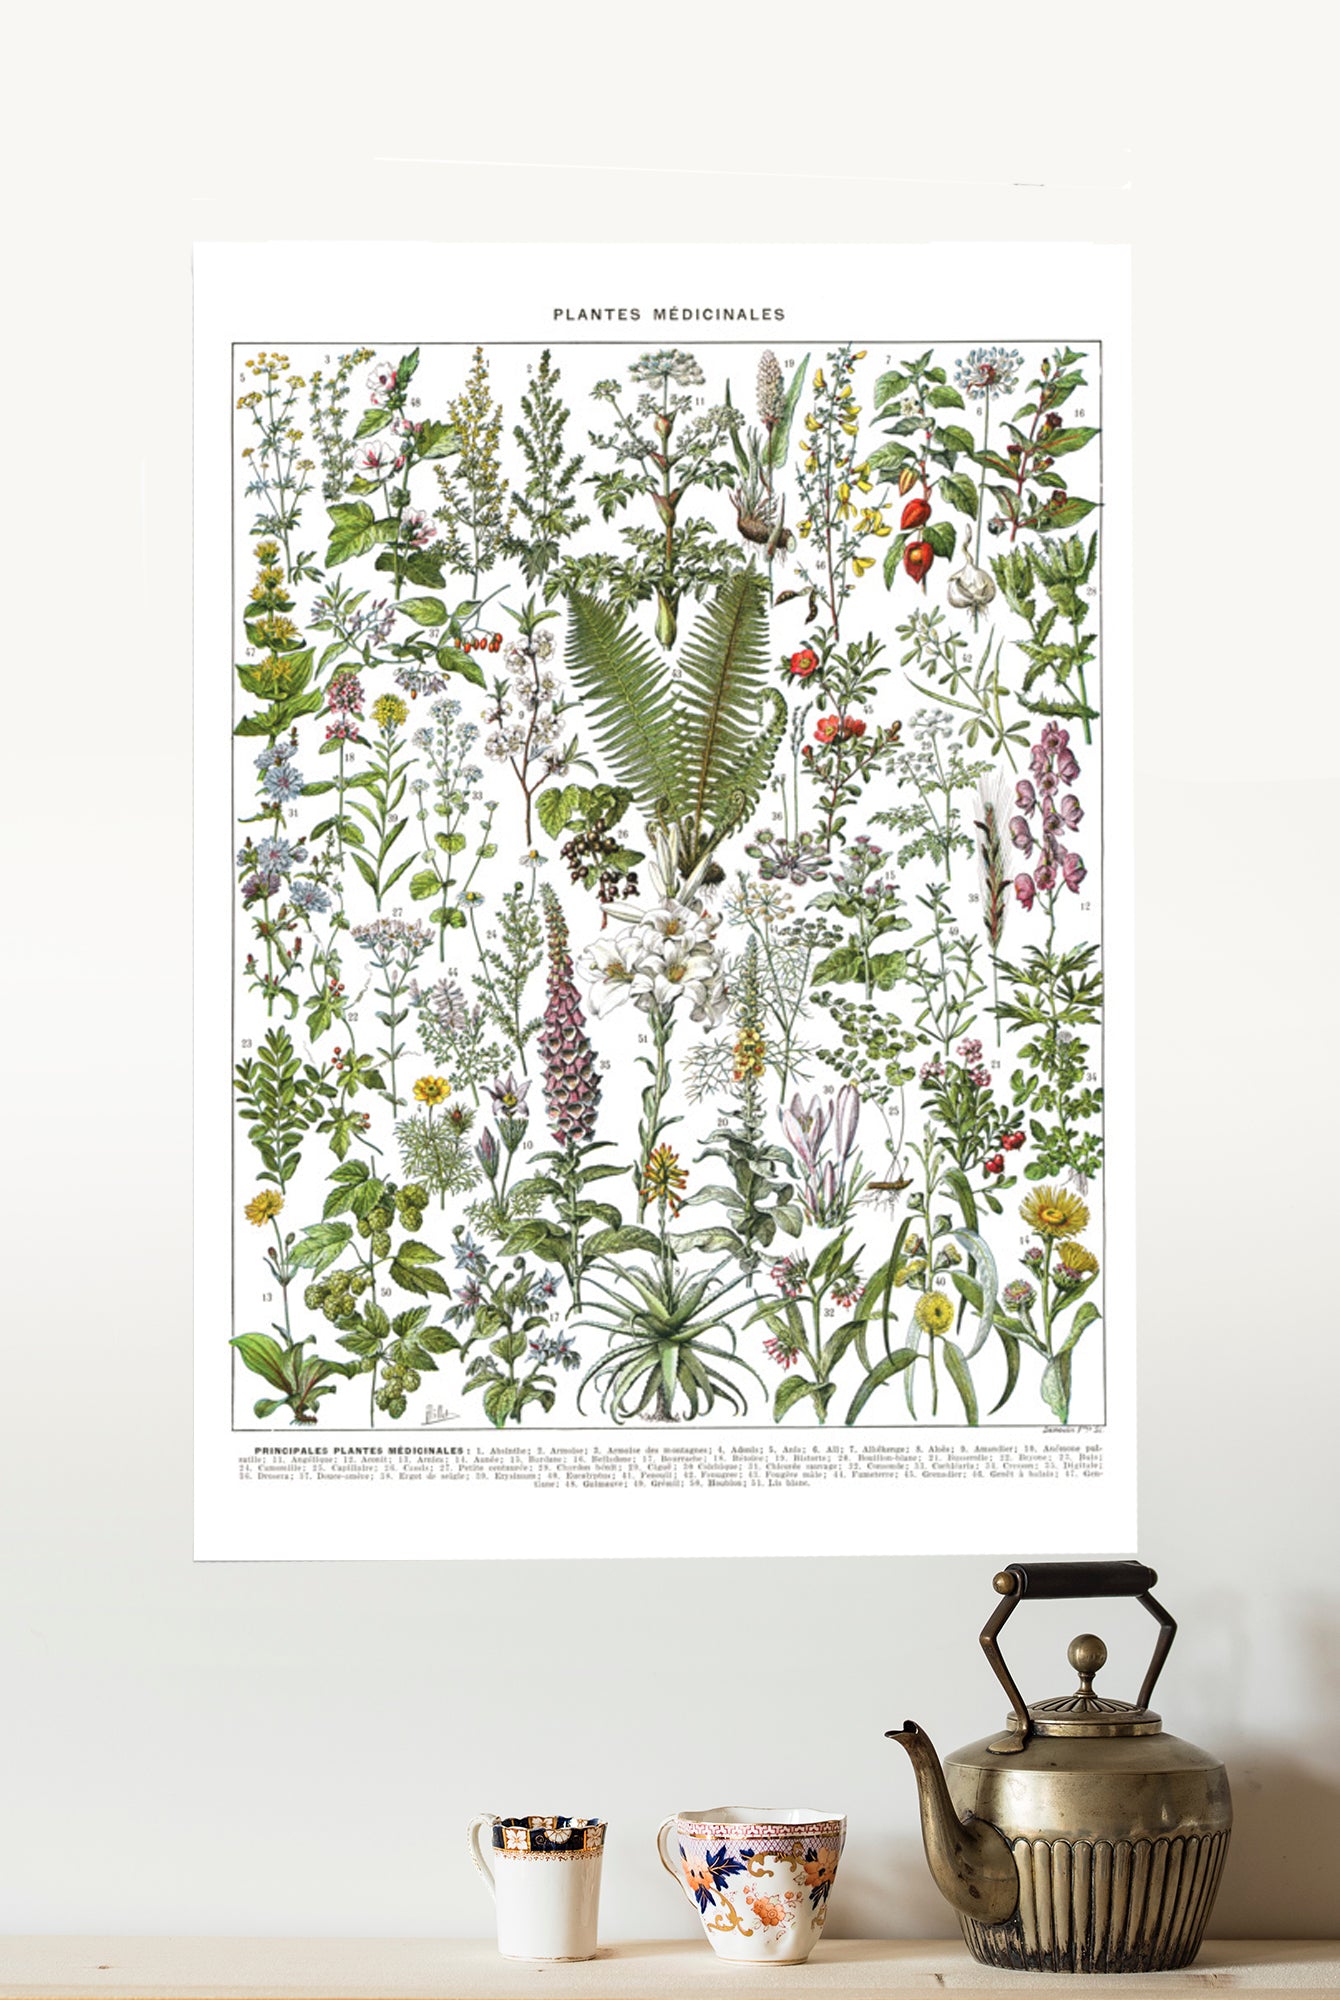 Large medicinal plants botanical poster A to F by Adolphe Millot